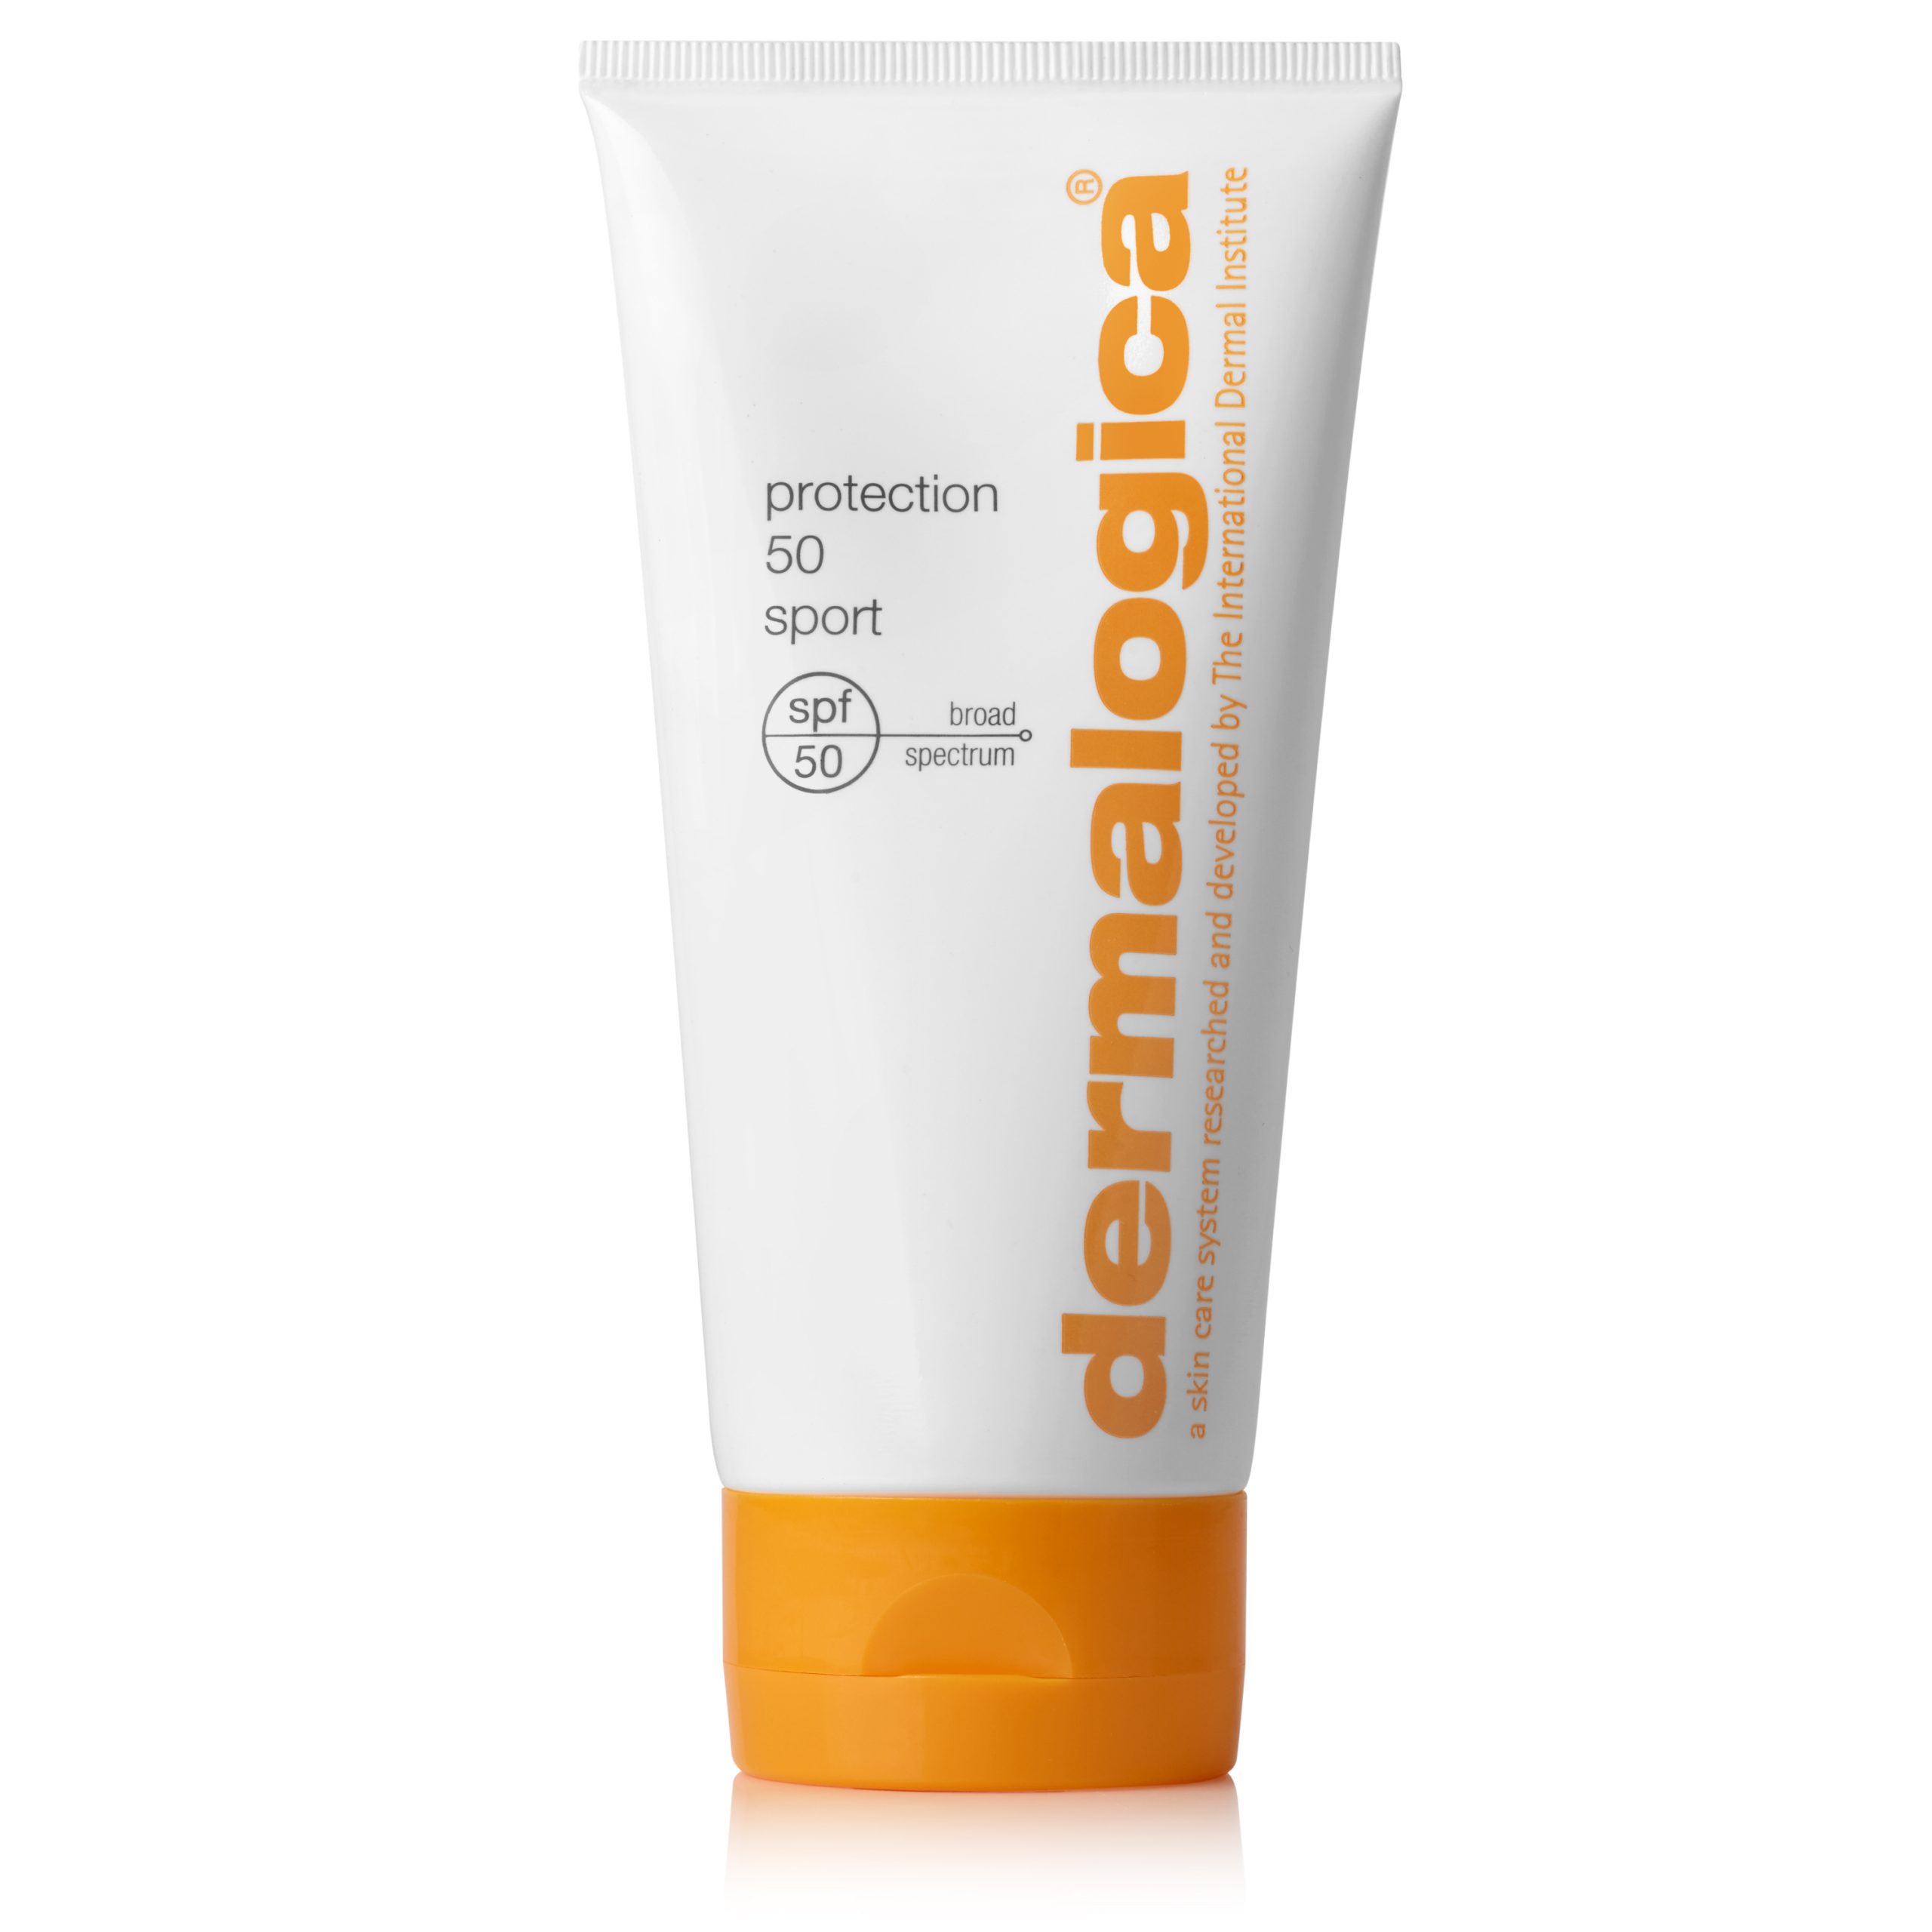 Protection 50 sport SPF50